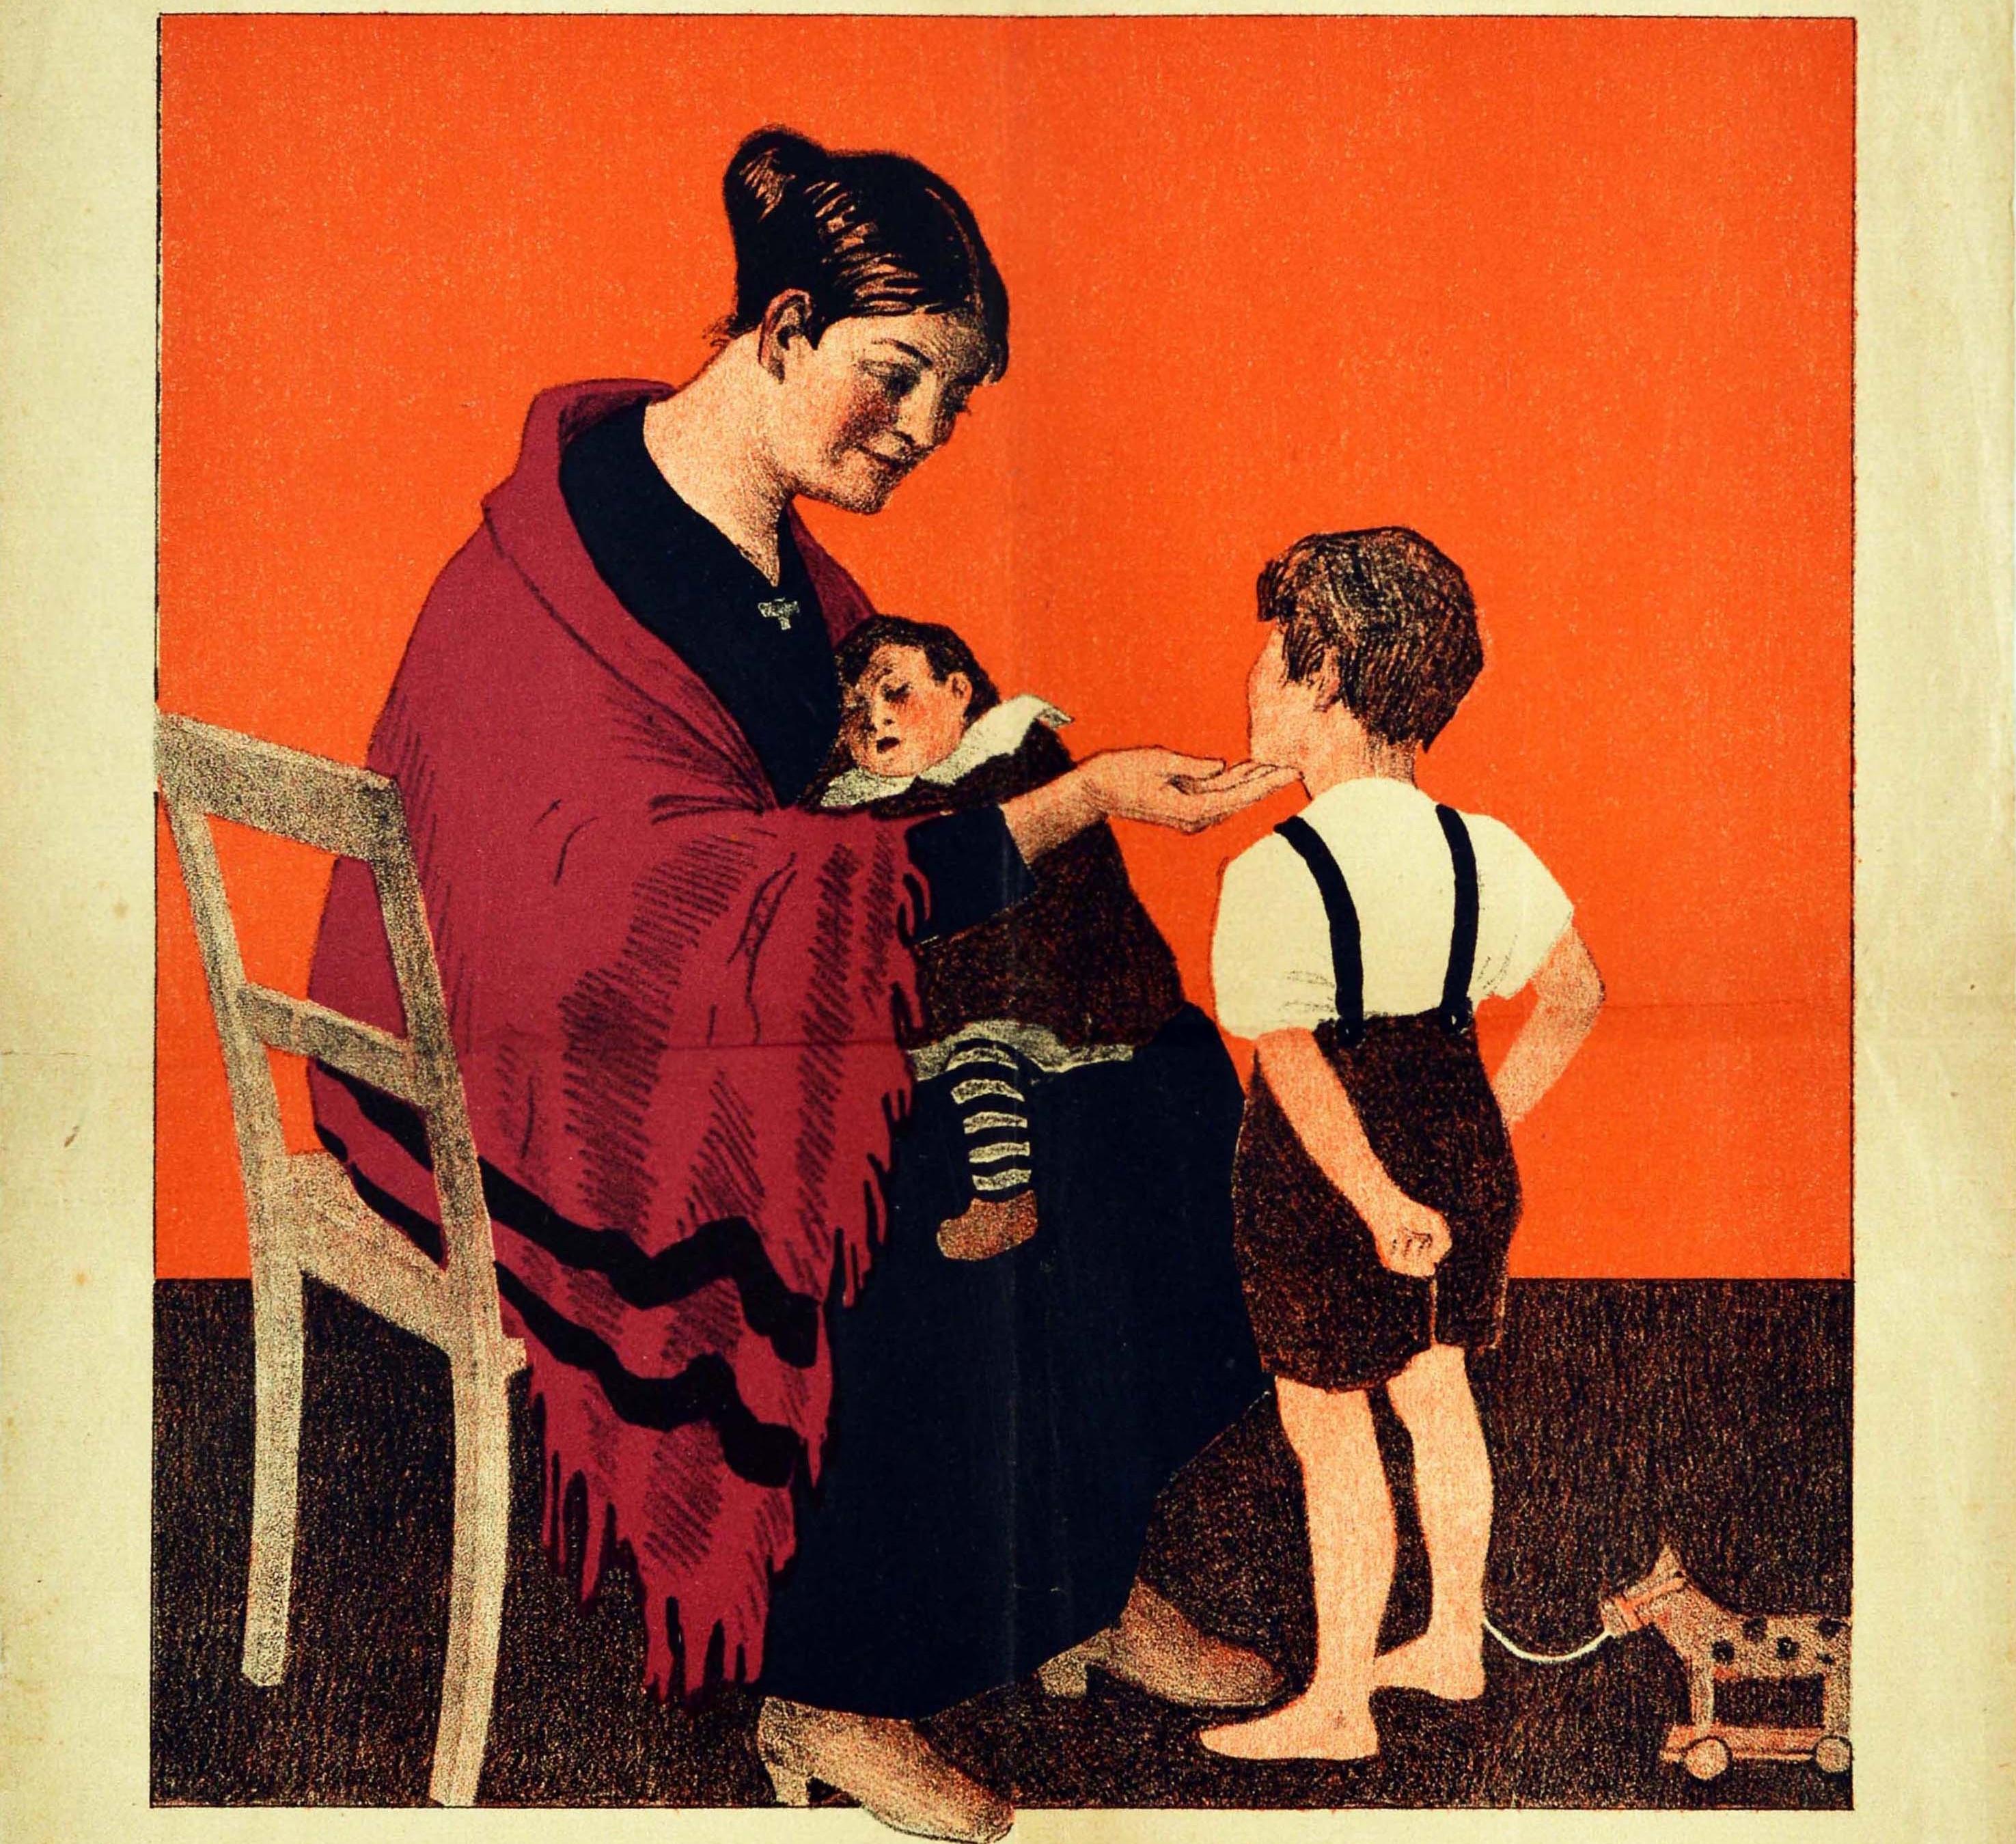 Original vintage propaganda poster - To Protect the Children of Finland! - issued by the Mannerheim League for Child Welfare featuring a lady wearing a pink shawl with a sleeping baby on her lap, smiling at a small boy in short dungarees, holding a